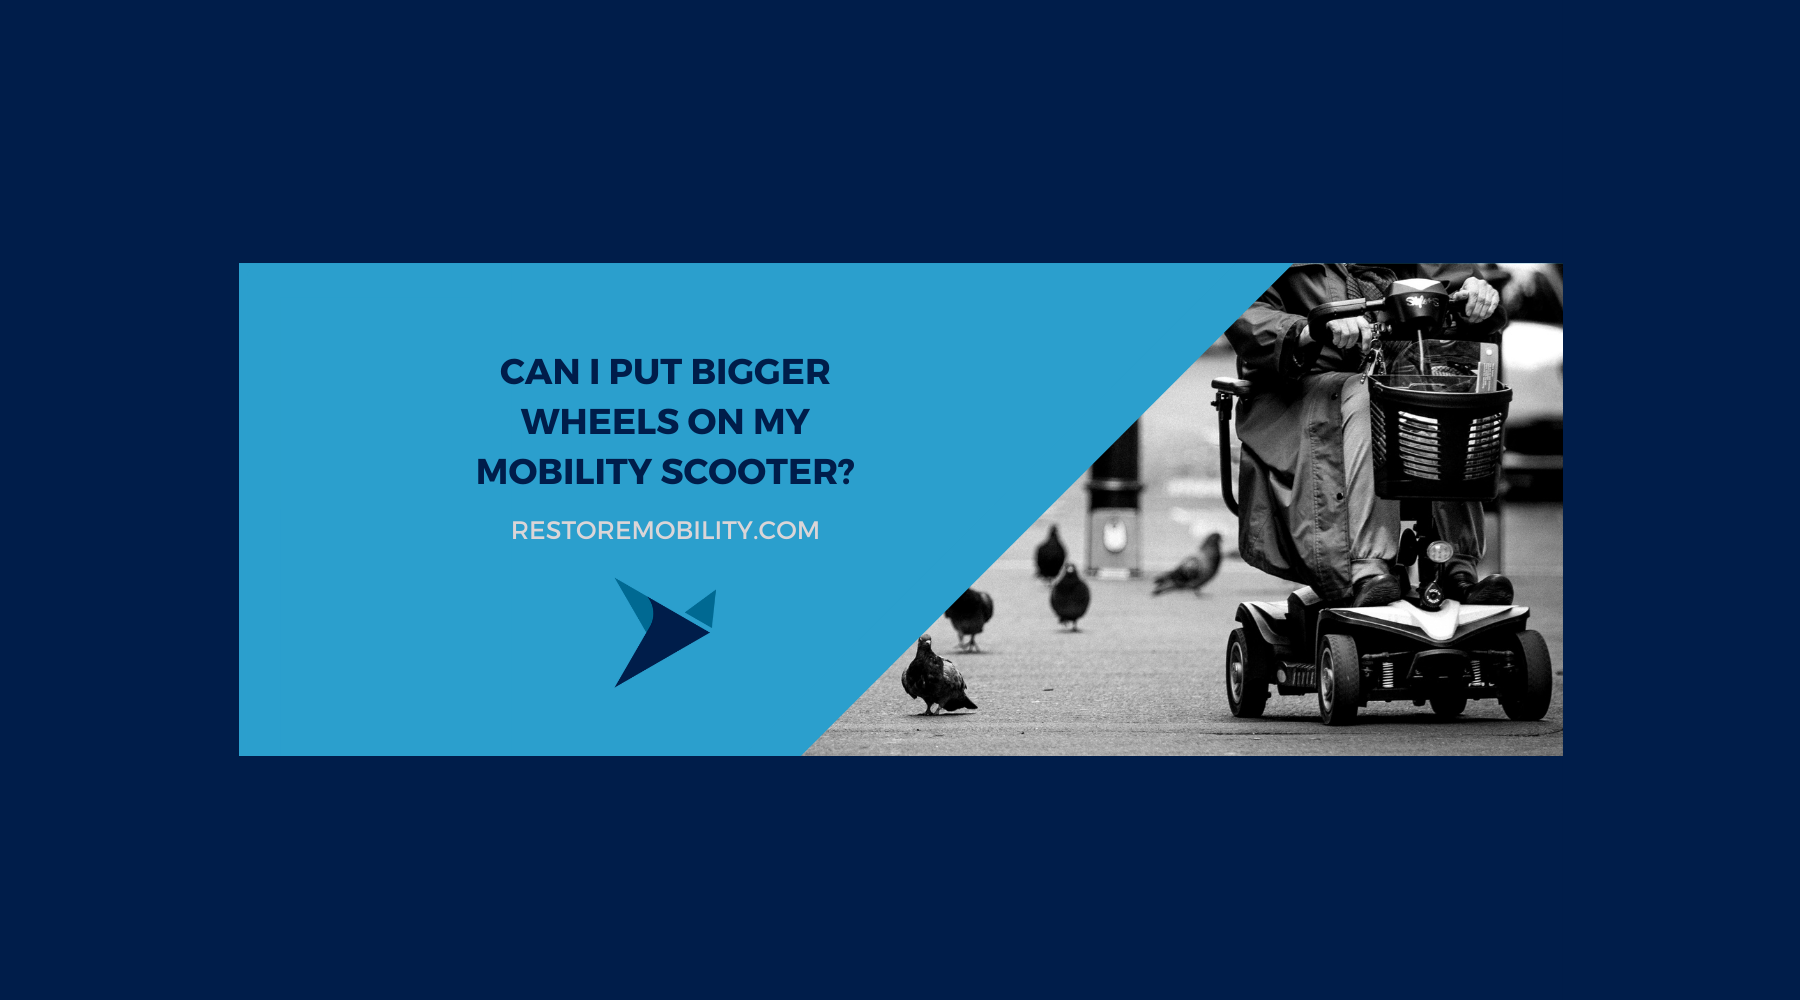 Can I Put Bigger Wheels on My Mobility Scooter?